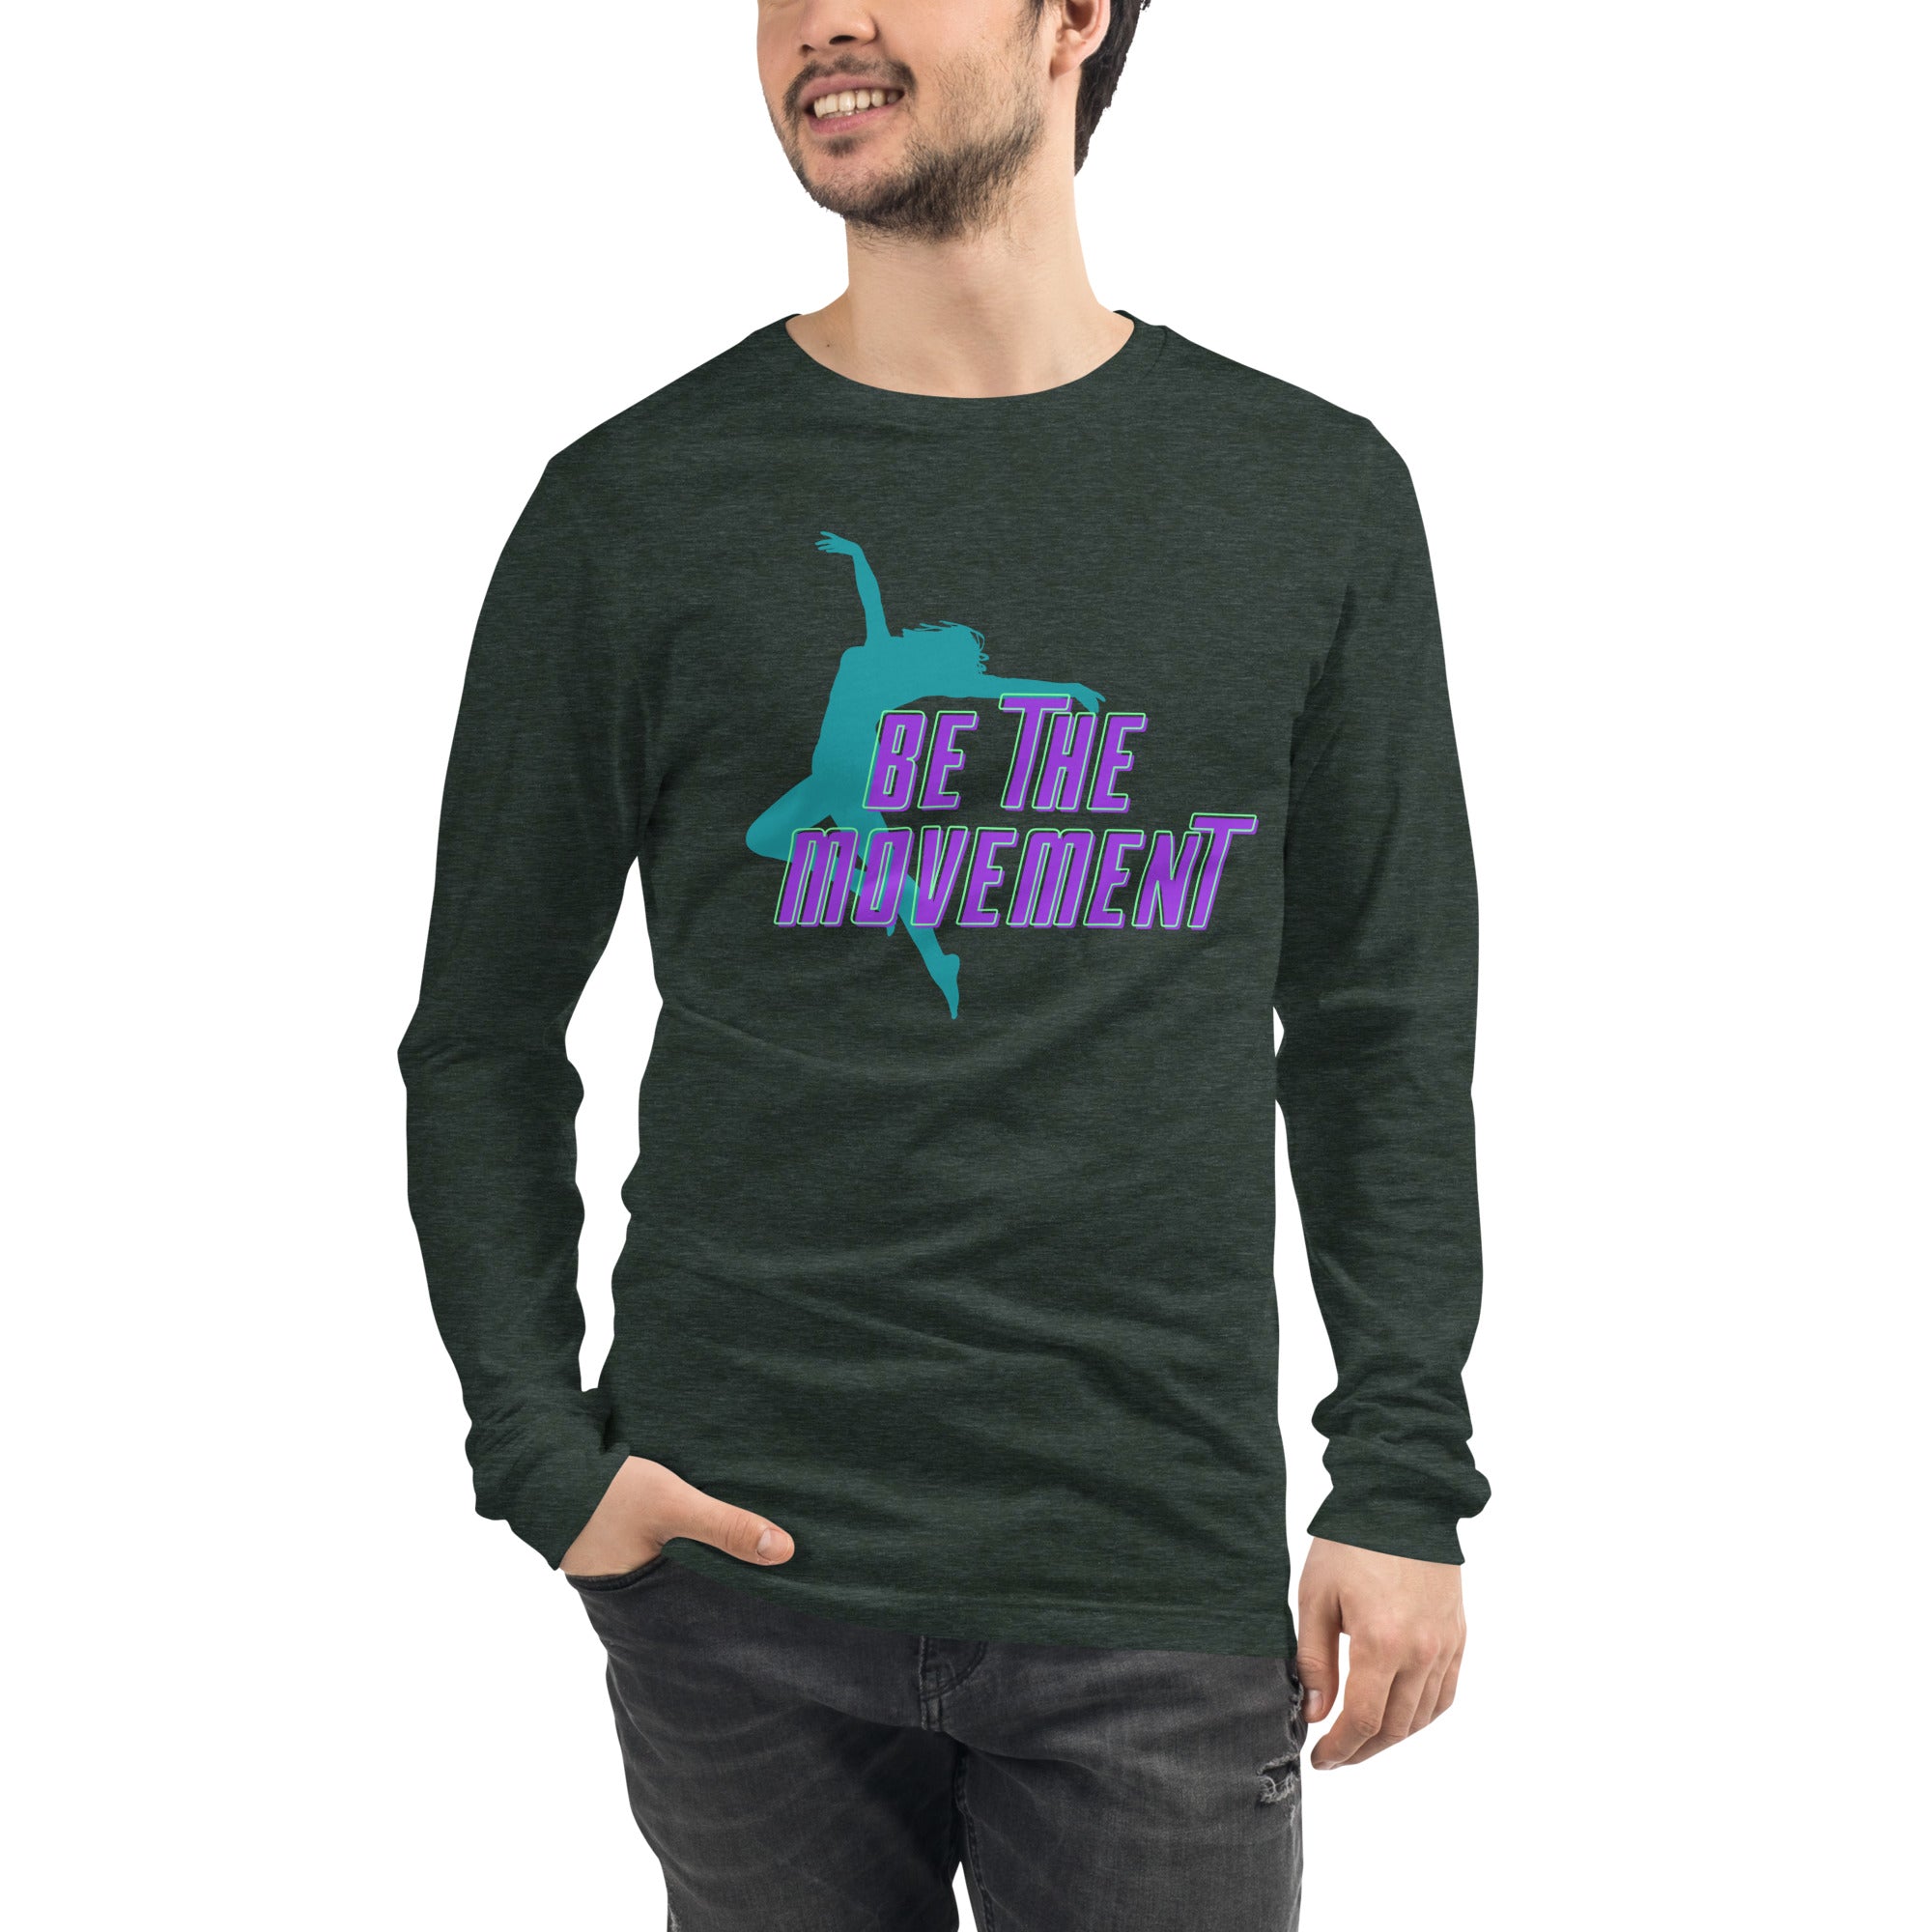 Be The Movement Men's Select Long Sleeve